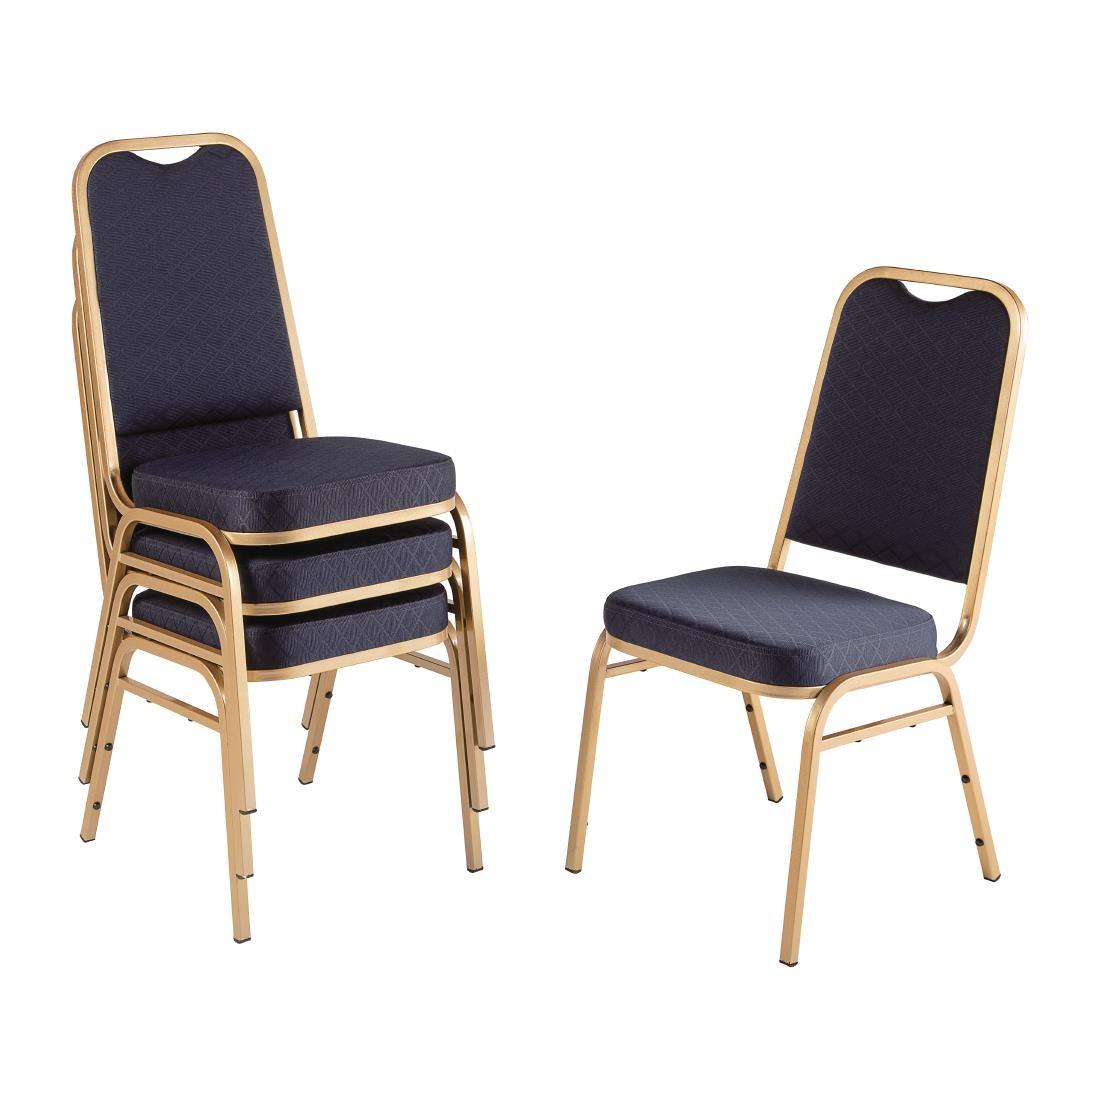 Bolero Square Back Banquet Chairs Blue & Gold (Pack of 4) - DL015  - 4